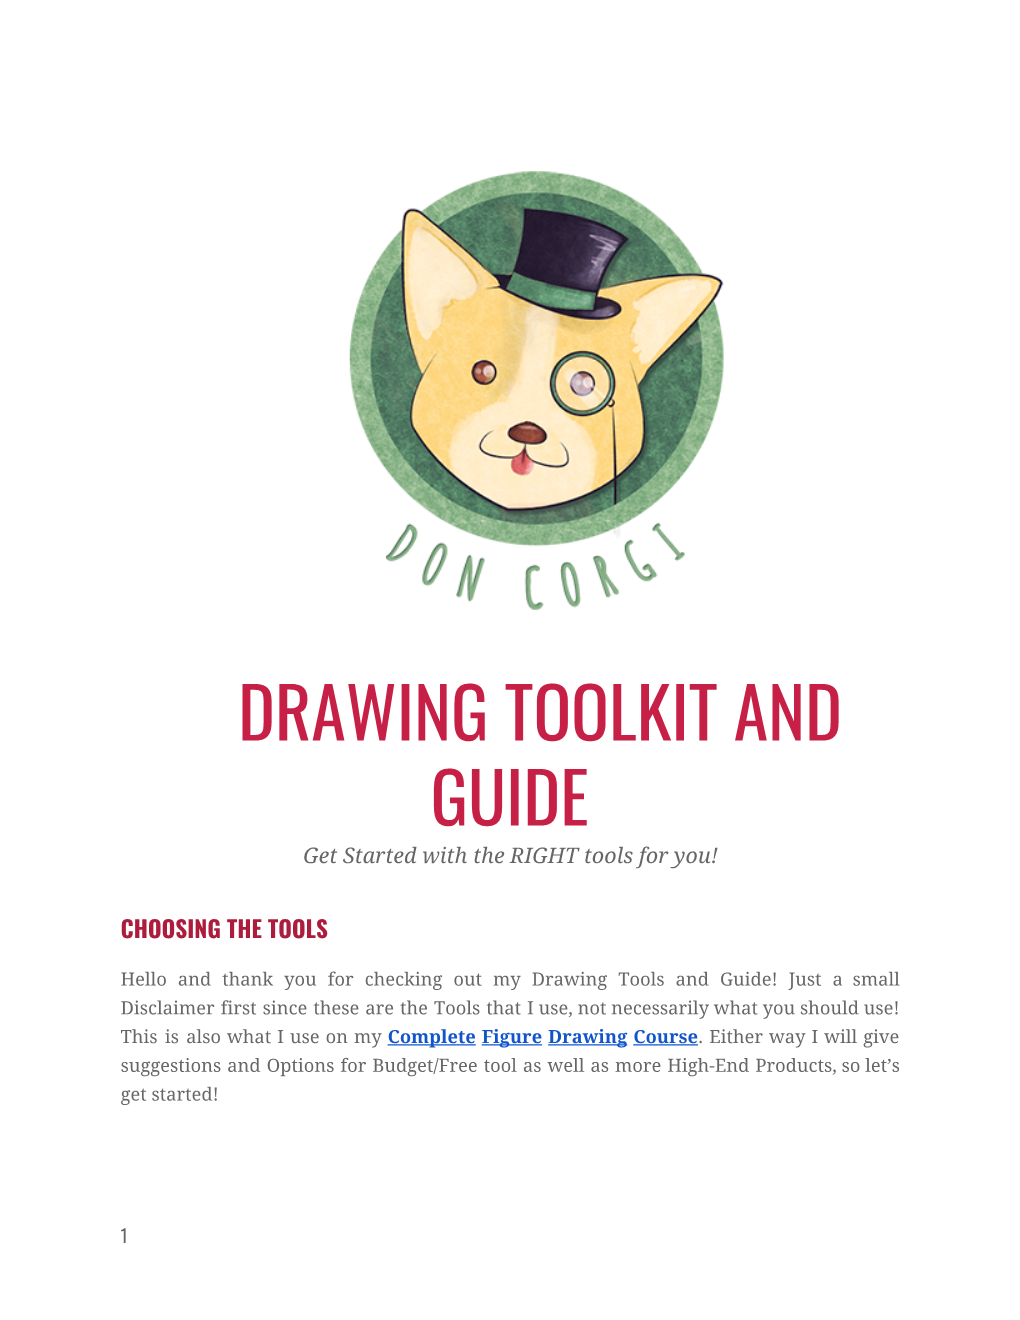 DRAWING TOOLKIT and GUIDE Get Started with the RIGHT Tools for You!